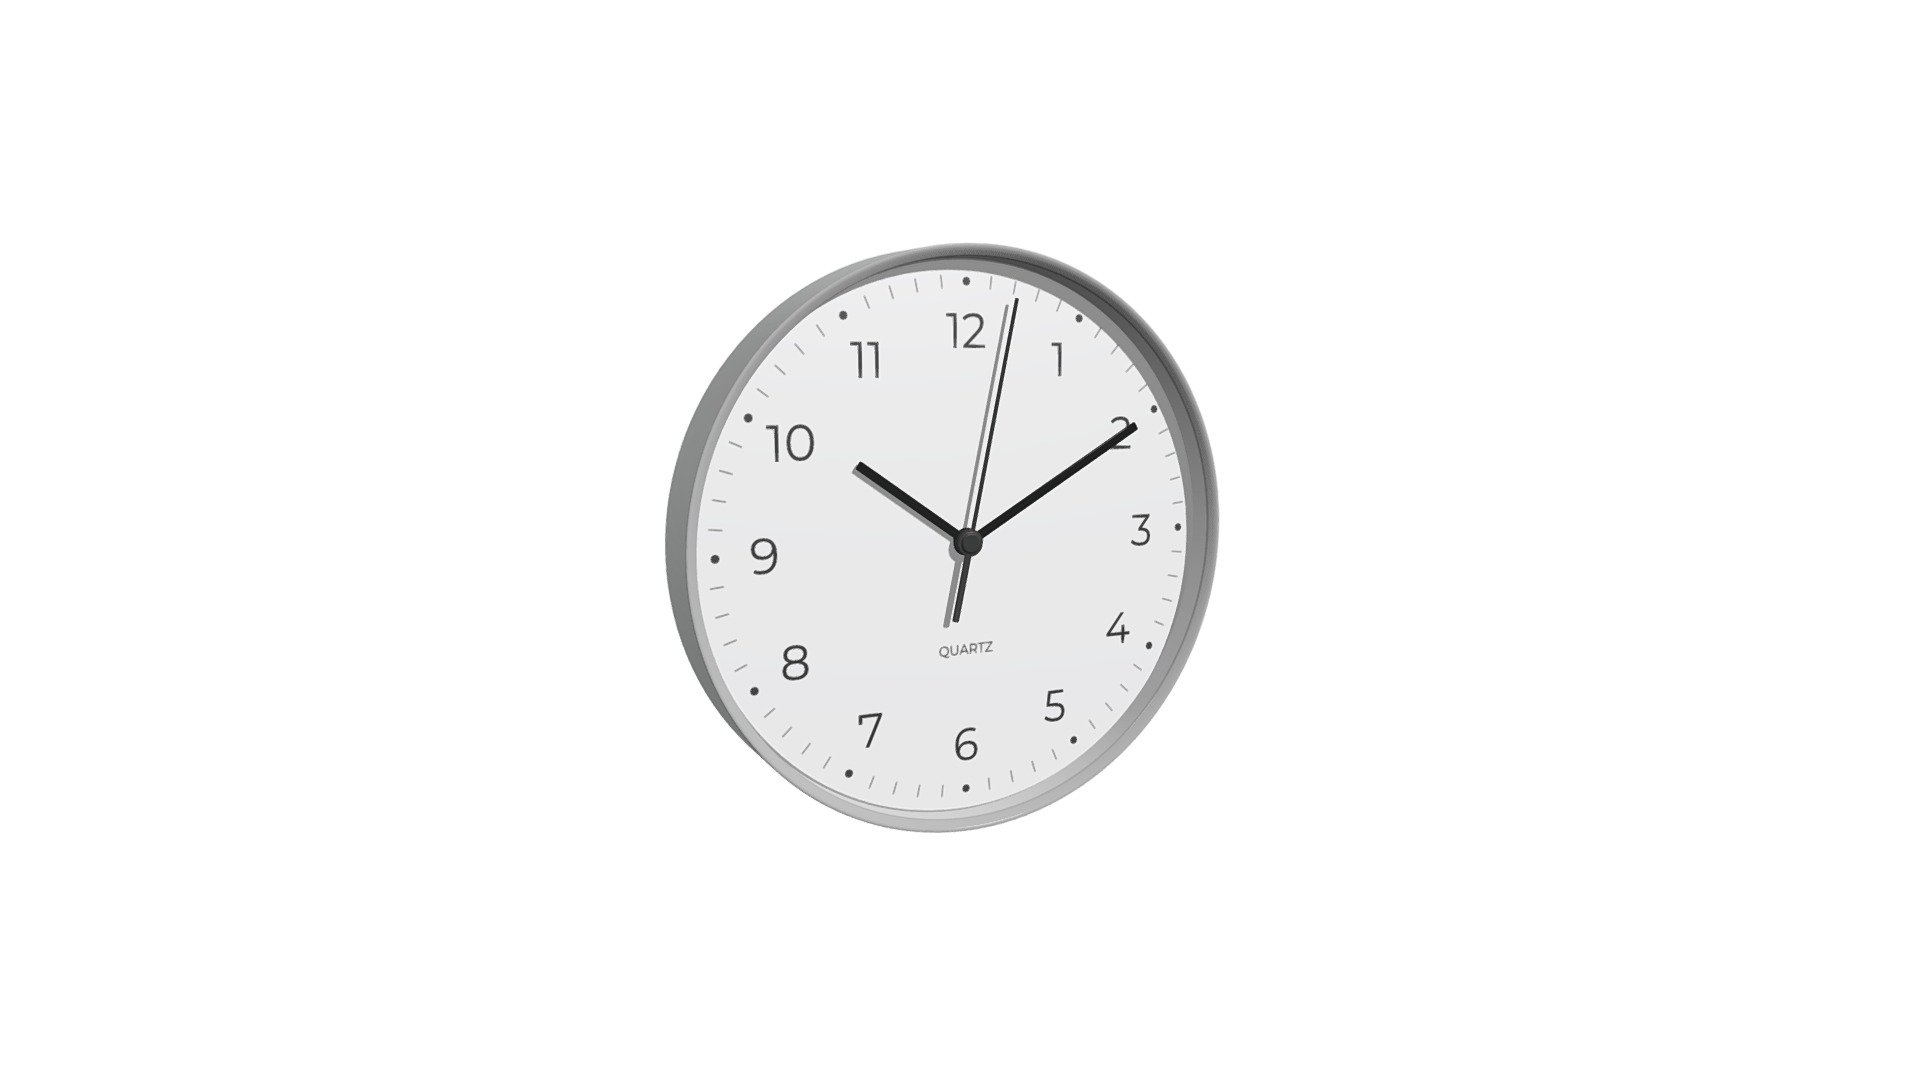 An analog wall clock coloured white and grey. 3 hands, numbering for all hours, and lines/dots to aid in reading the time. 28cm in diameter, 4cm thick. For interior spaces such as an office.

Geometry:




4 separate objects - clock, hour/minute/second hands.

Quads and tris only

Not subdividable

Smooth shading with sharp edges provided by the normal map.

Modelled to real-world scale, units: metres

Mesh is not watertight, parts of the geometry have been left separated

Textures:




Baked PBR textures, Color, normal, roughness.

2048x2048 resolution (2K)

png format

Entirely UV mapped with no overlap

The clock backside has no detail and uses a lower texel density.

Created in Blender. .fbx and .blend files have textures packed (embedded in the file). Blender file has object constraints for the minute and second hand. Moving the hour hand will correctly move the other hands. All hands are parented to the clock object 3d model